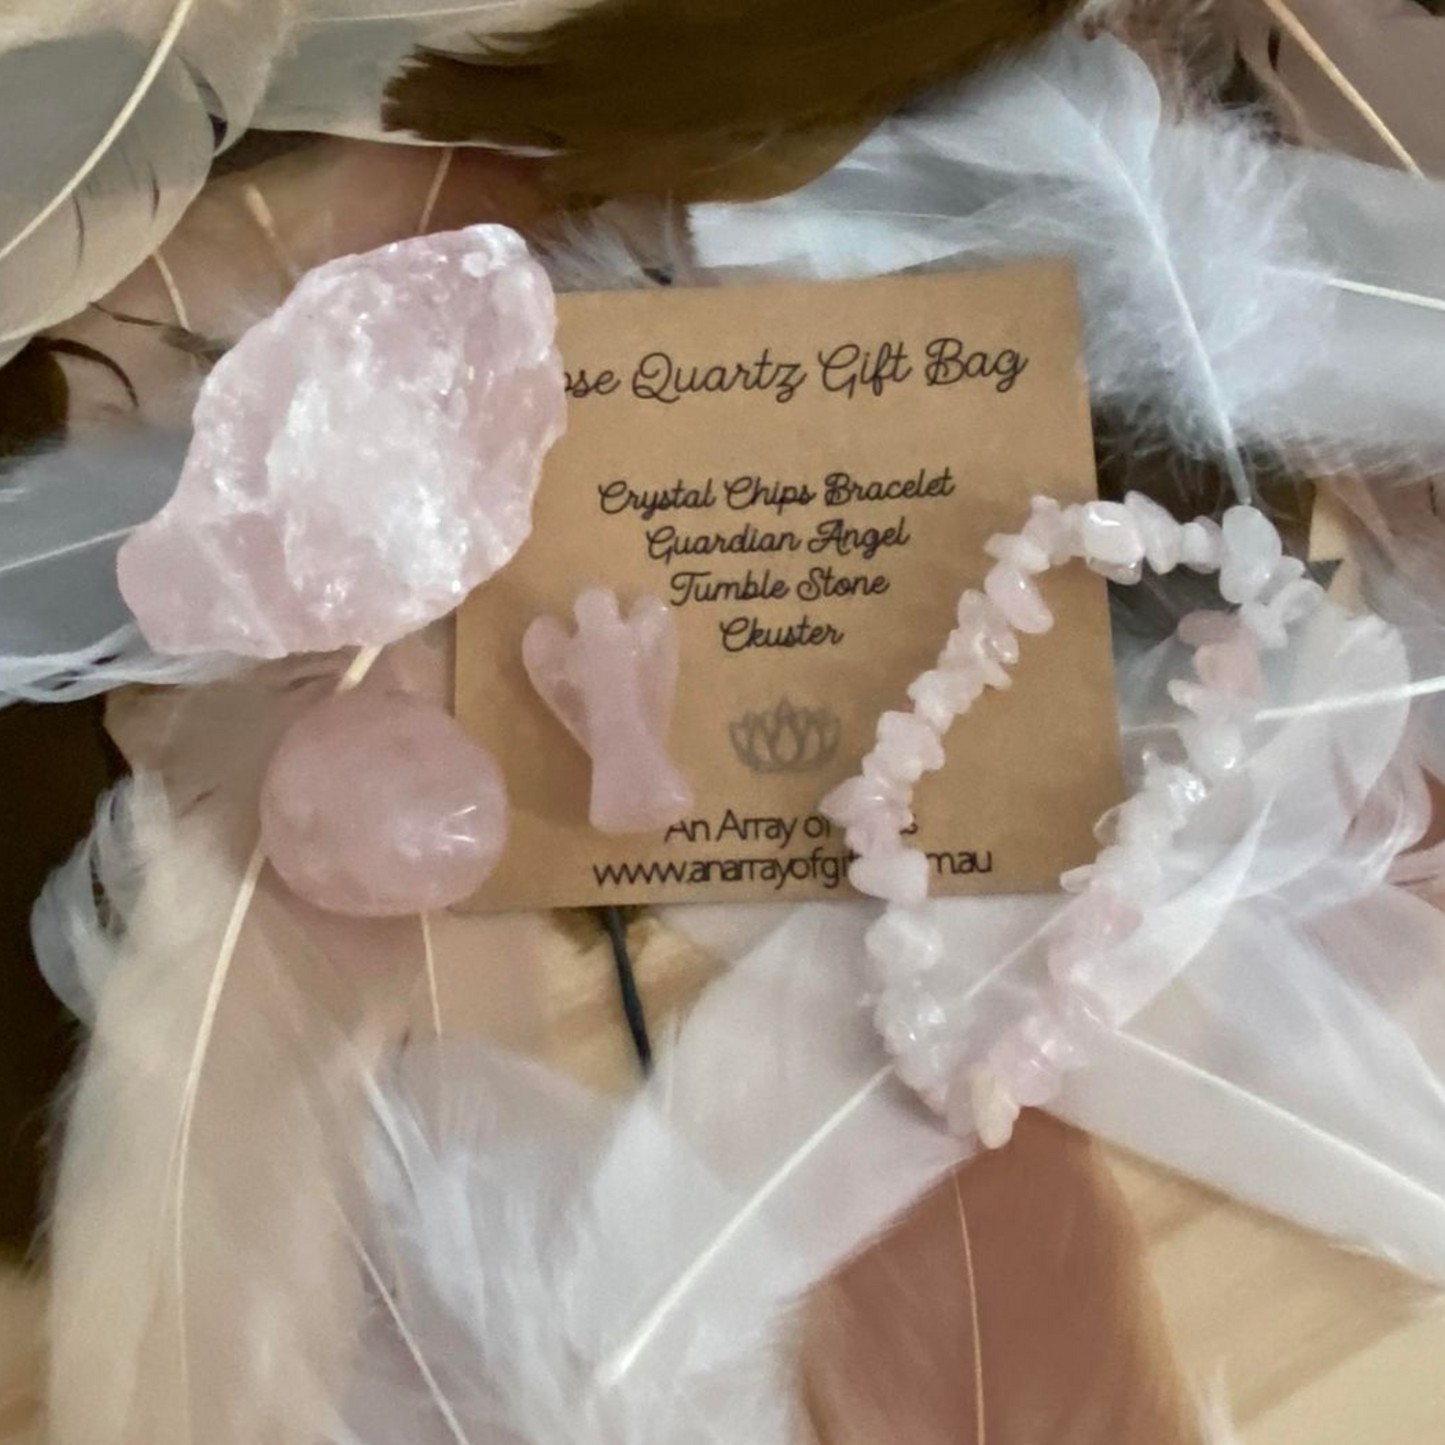 Rose Quartz Gift Bag with Crystal Chip Bracelet,Guardian Angel, Tumble Stone and Cluster.